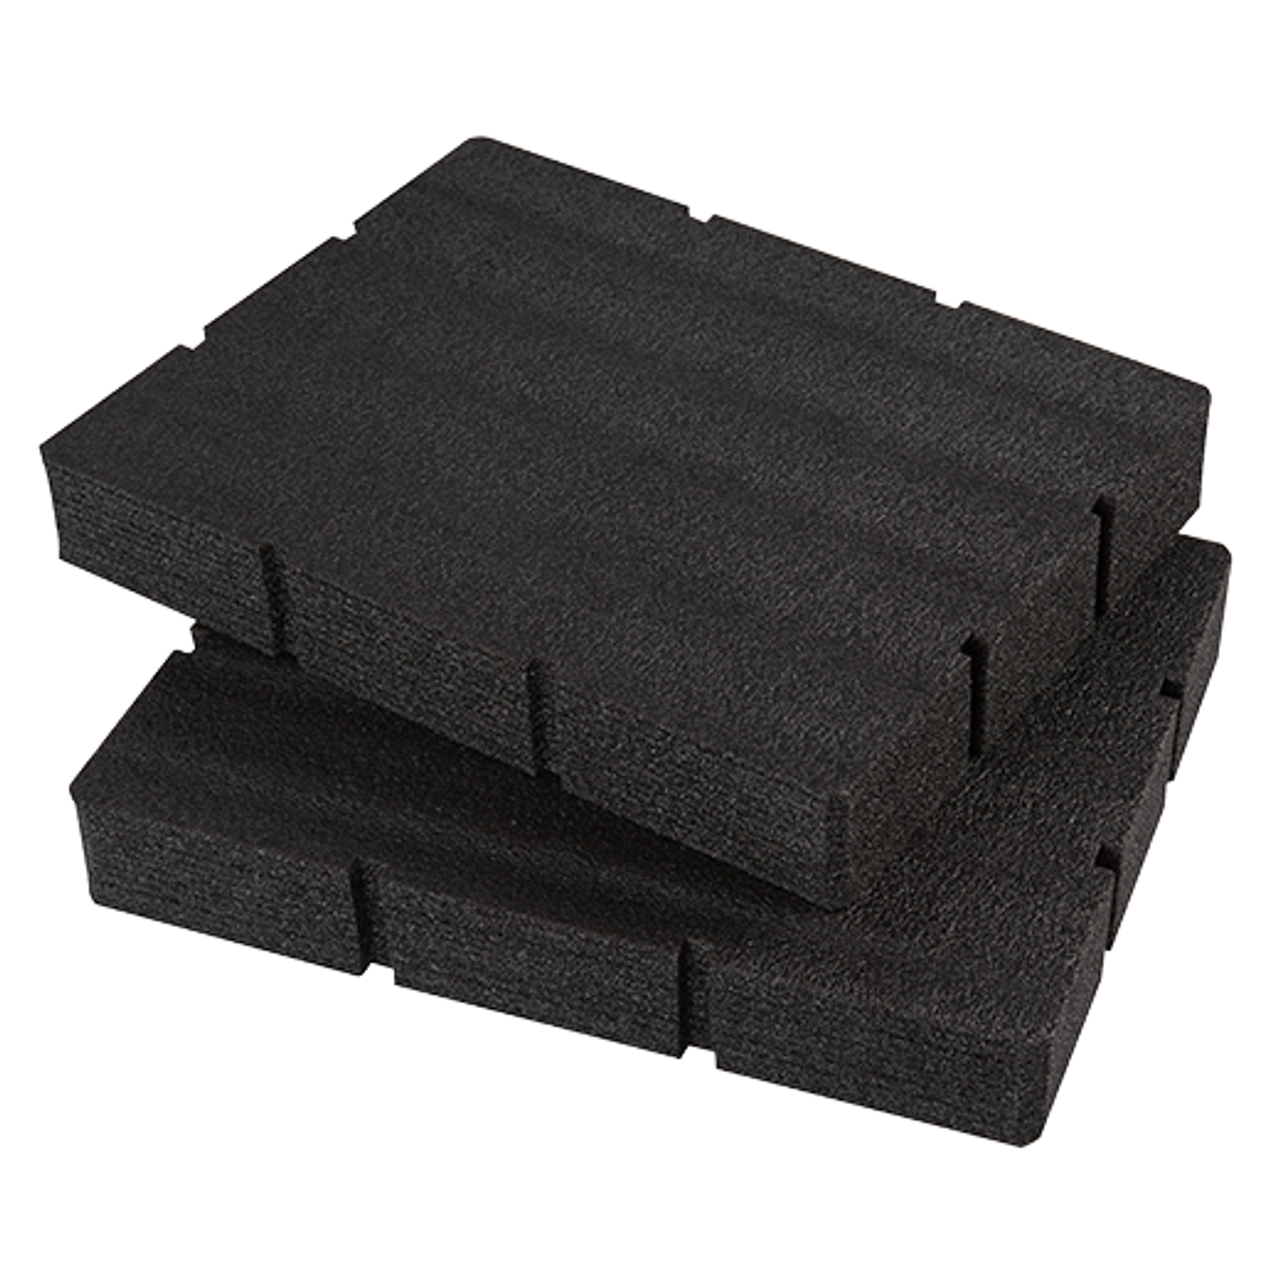 Customizable Foam Insert for PACKOUT™ Drawer Tool Boxes